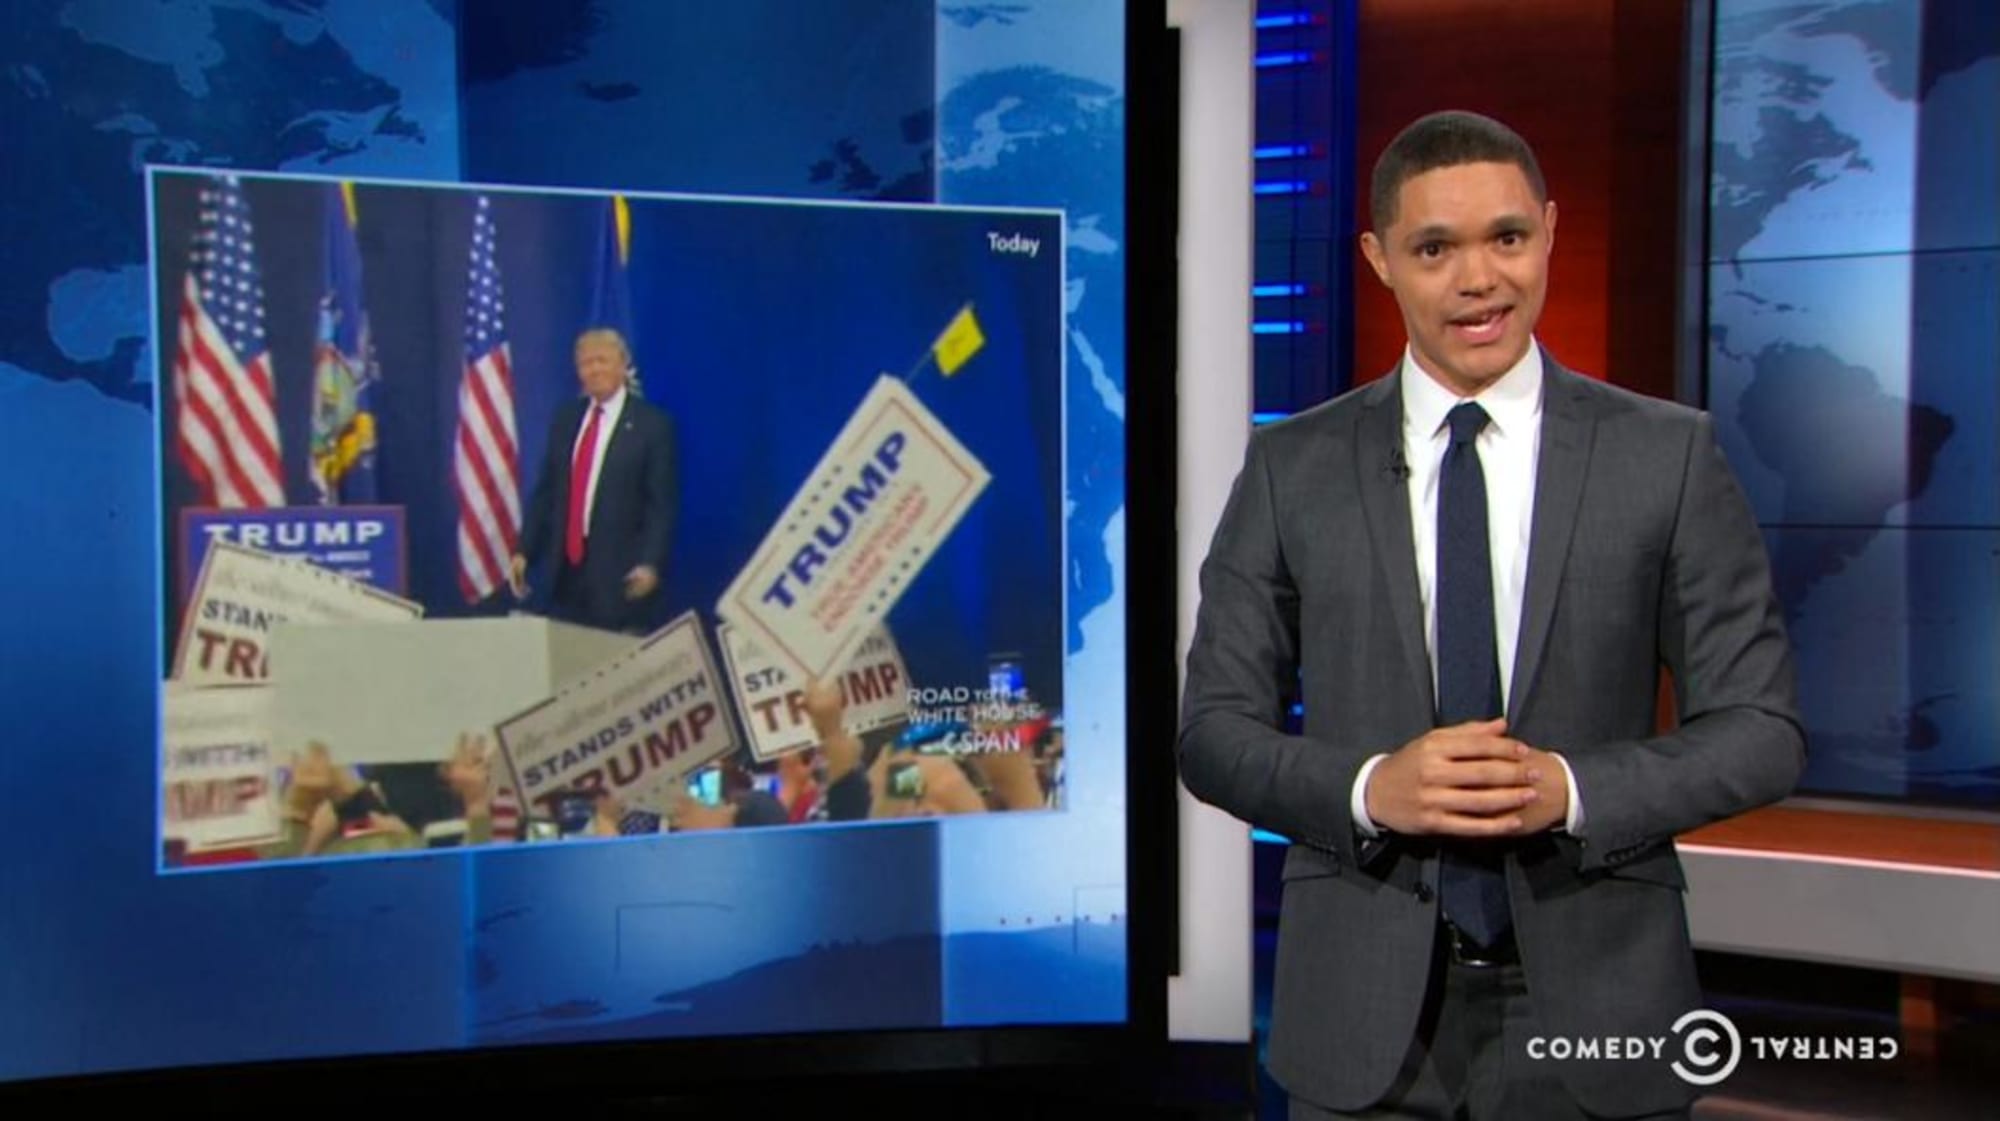 No, The Daily Show won't be cancelled